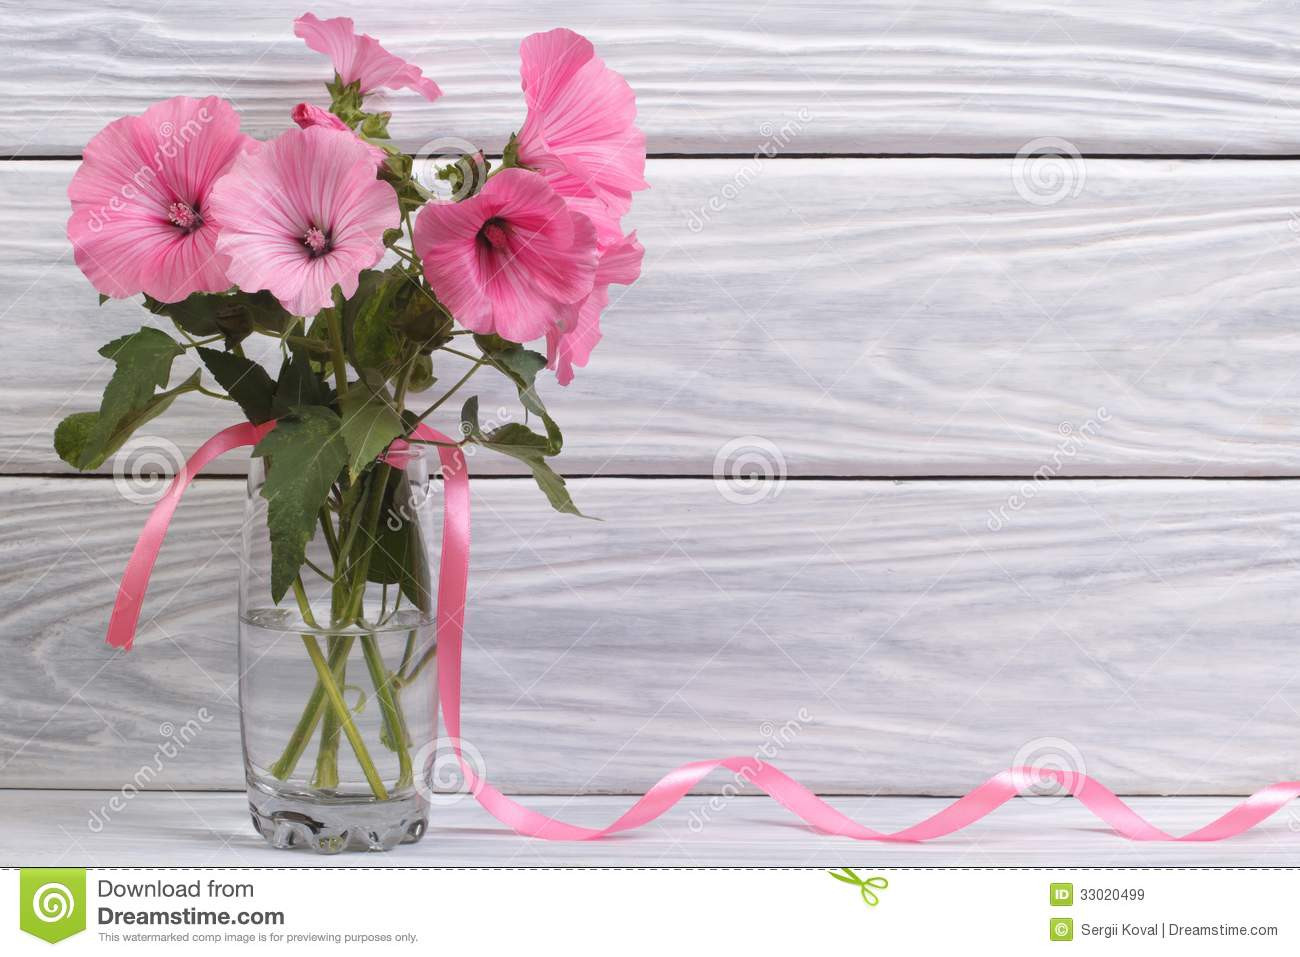 16 Ideal Pink Glass Bud Vase 2024 free download pink glass bud vase of lavatera pink flowers in a glass vase stock image image of bunch regarding lavatera pink flowers in a glass vase